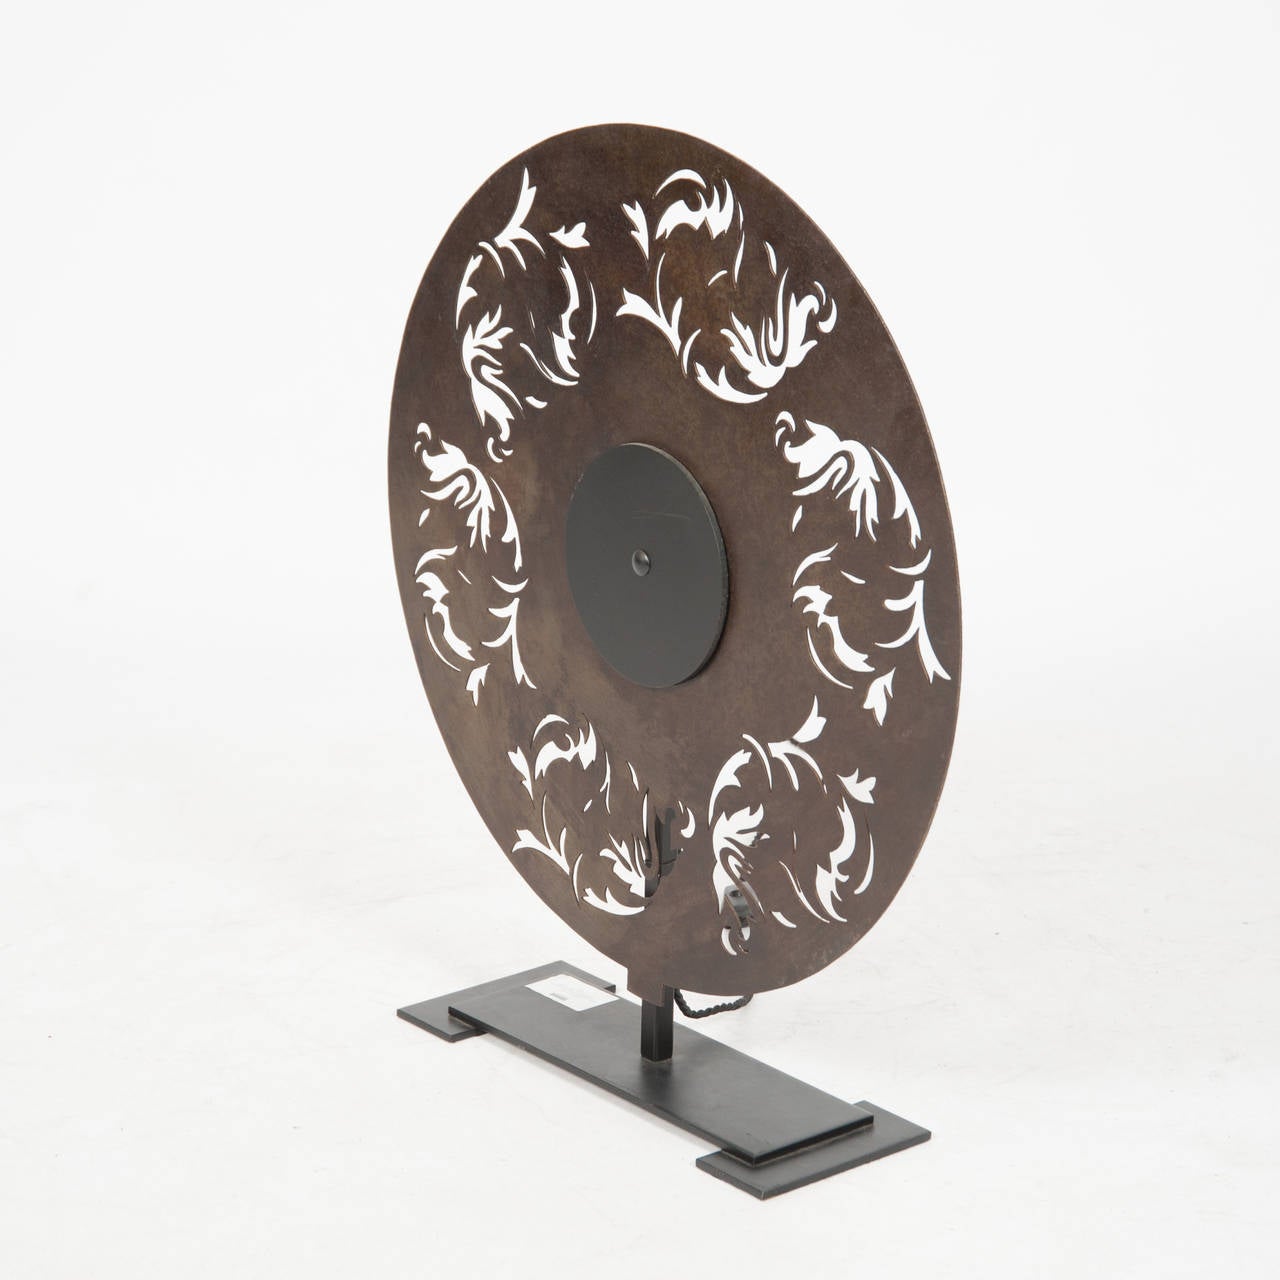 Metal Disc With Stencil Cutouts Now Made into a Lamp 

Height 610
Length 535 
Depth 130